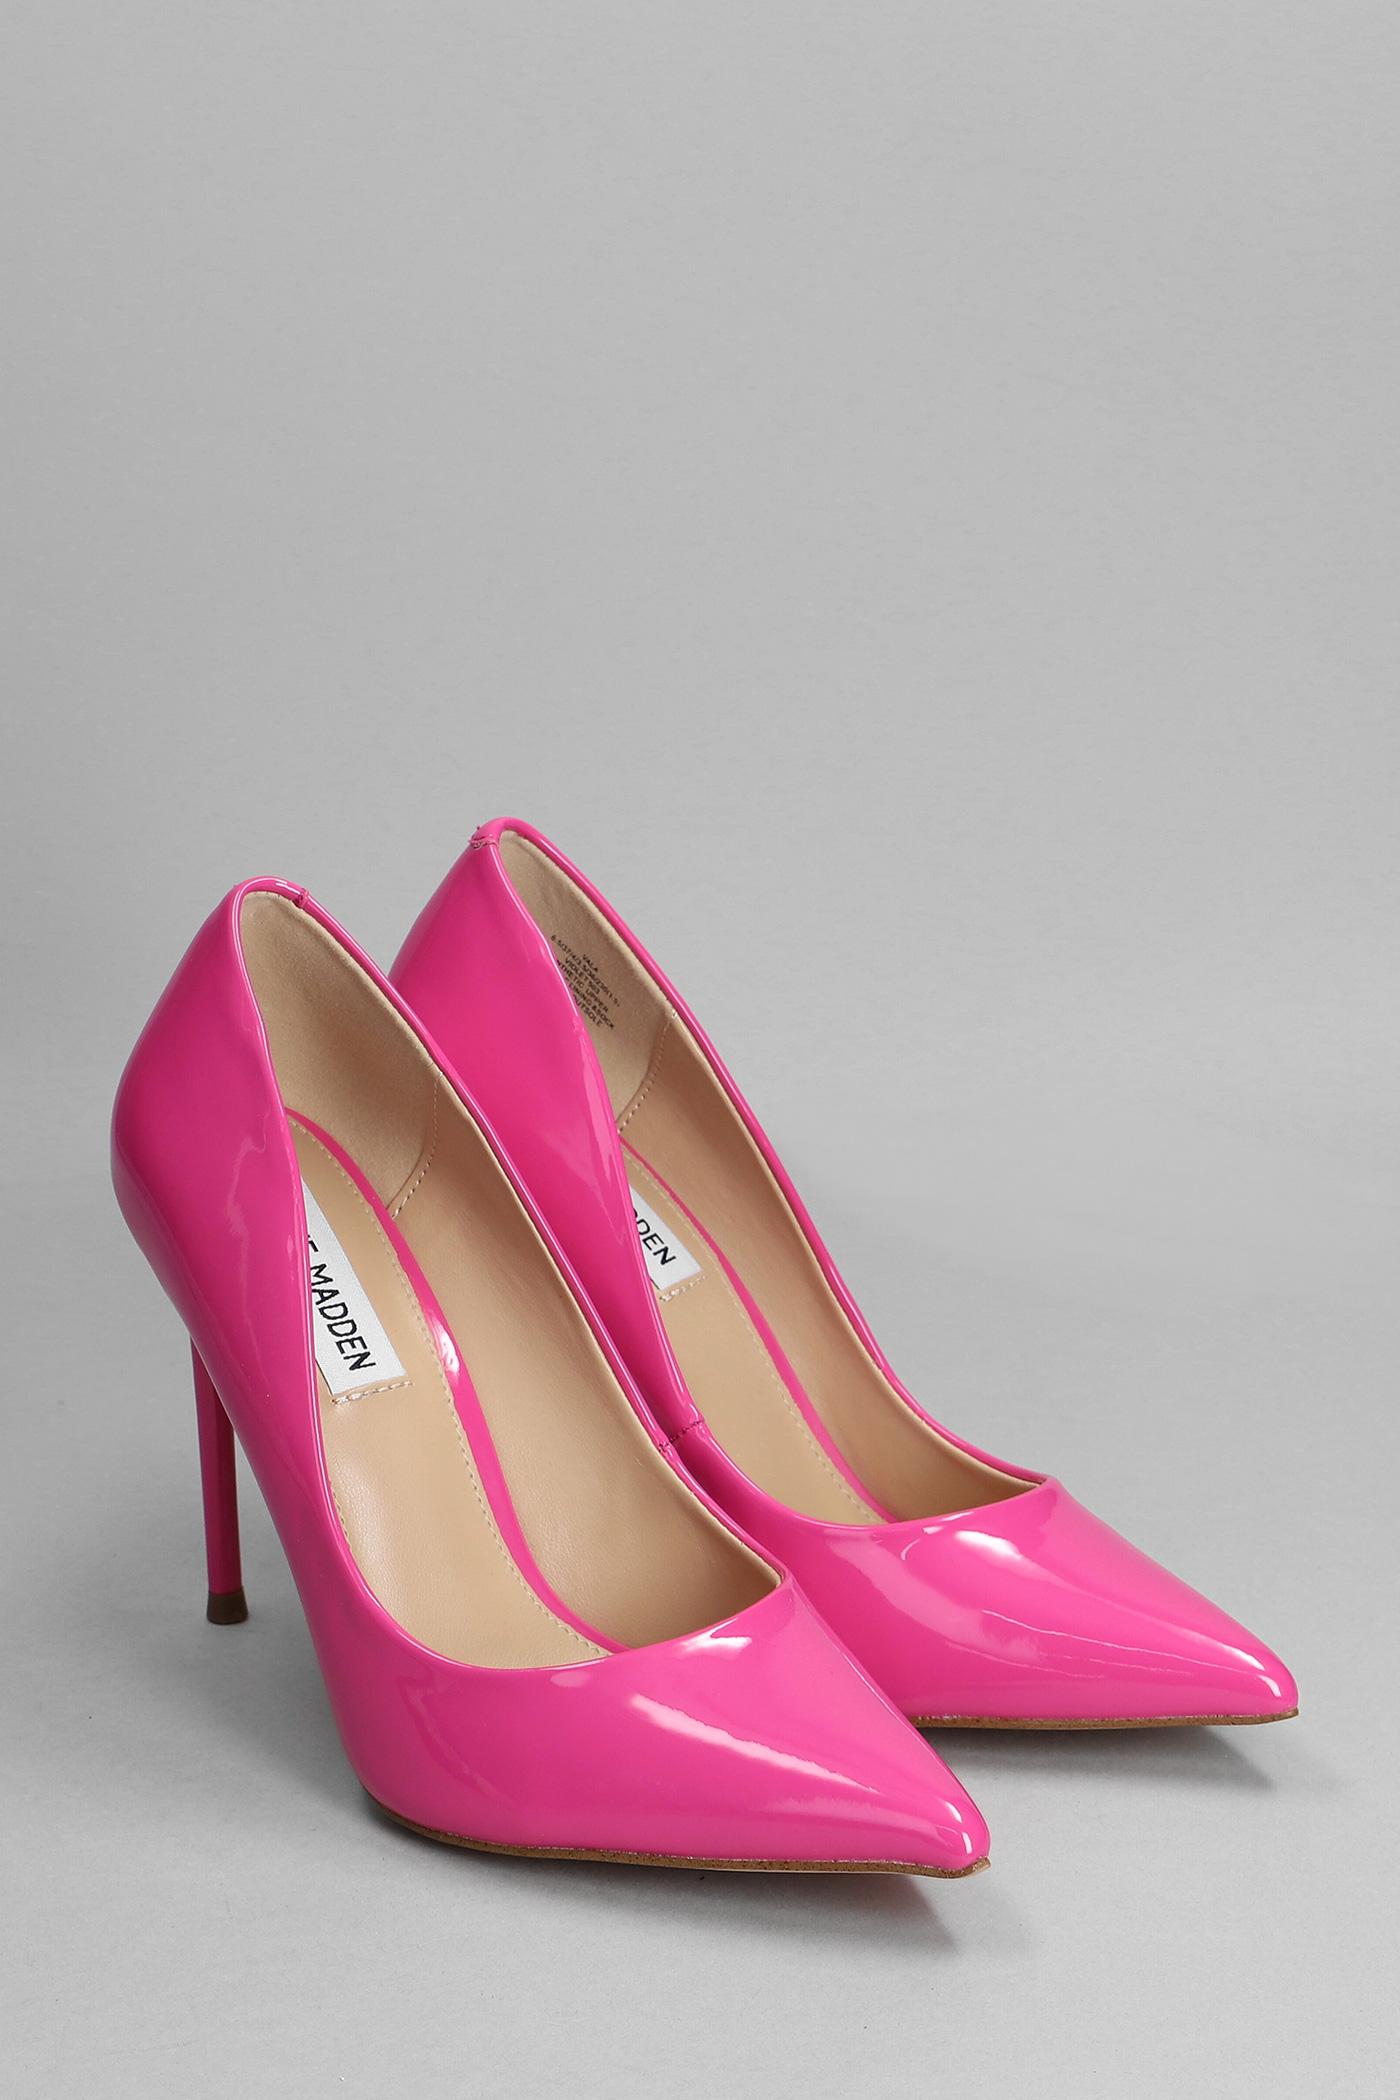 Steve Madden Vala Pumps In Fuxia Patent Leather in Pink | Lyst